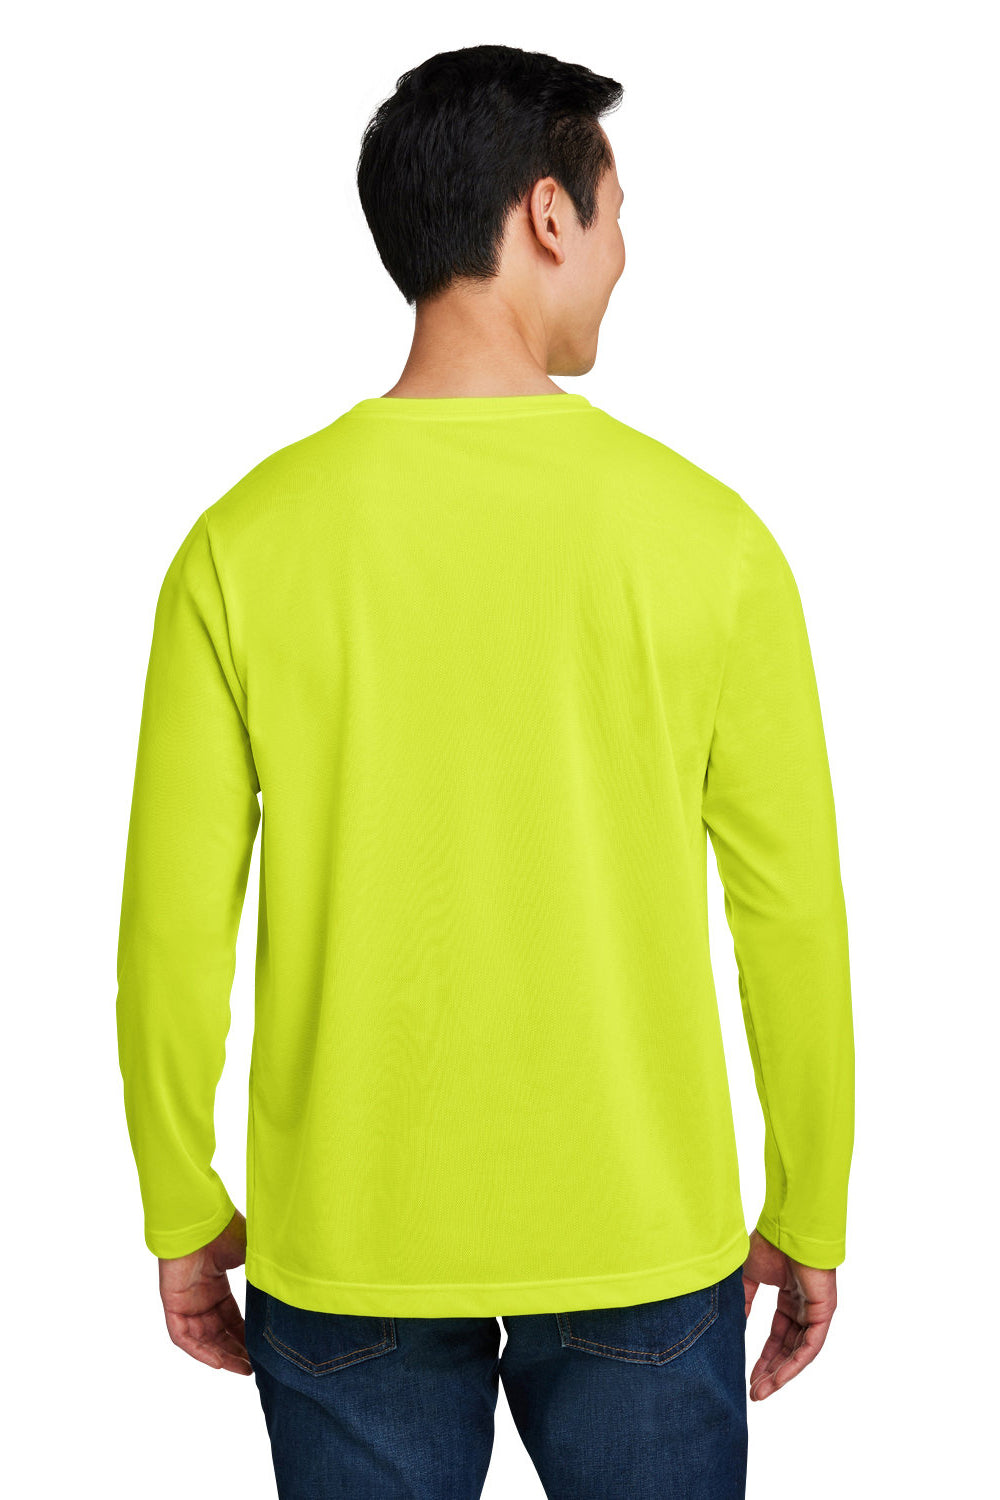 Harriton M118L Mens Charge Moisture Wicking Long Sleeve Crewneck T-Shirt Safety Yellow Back